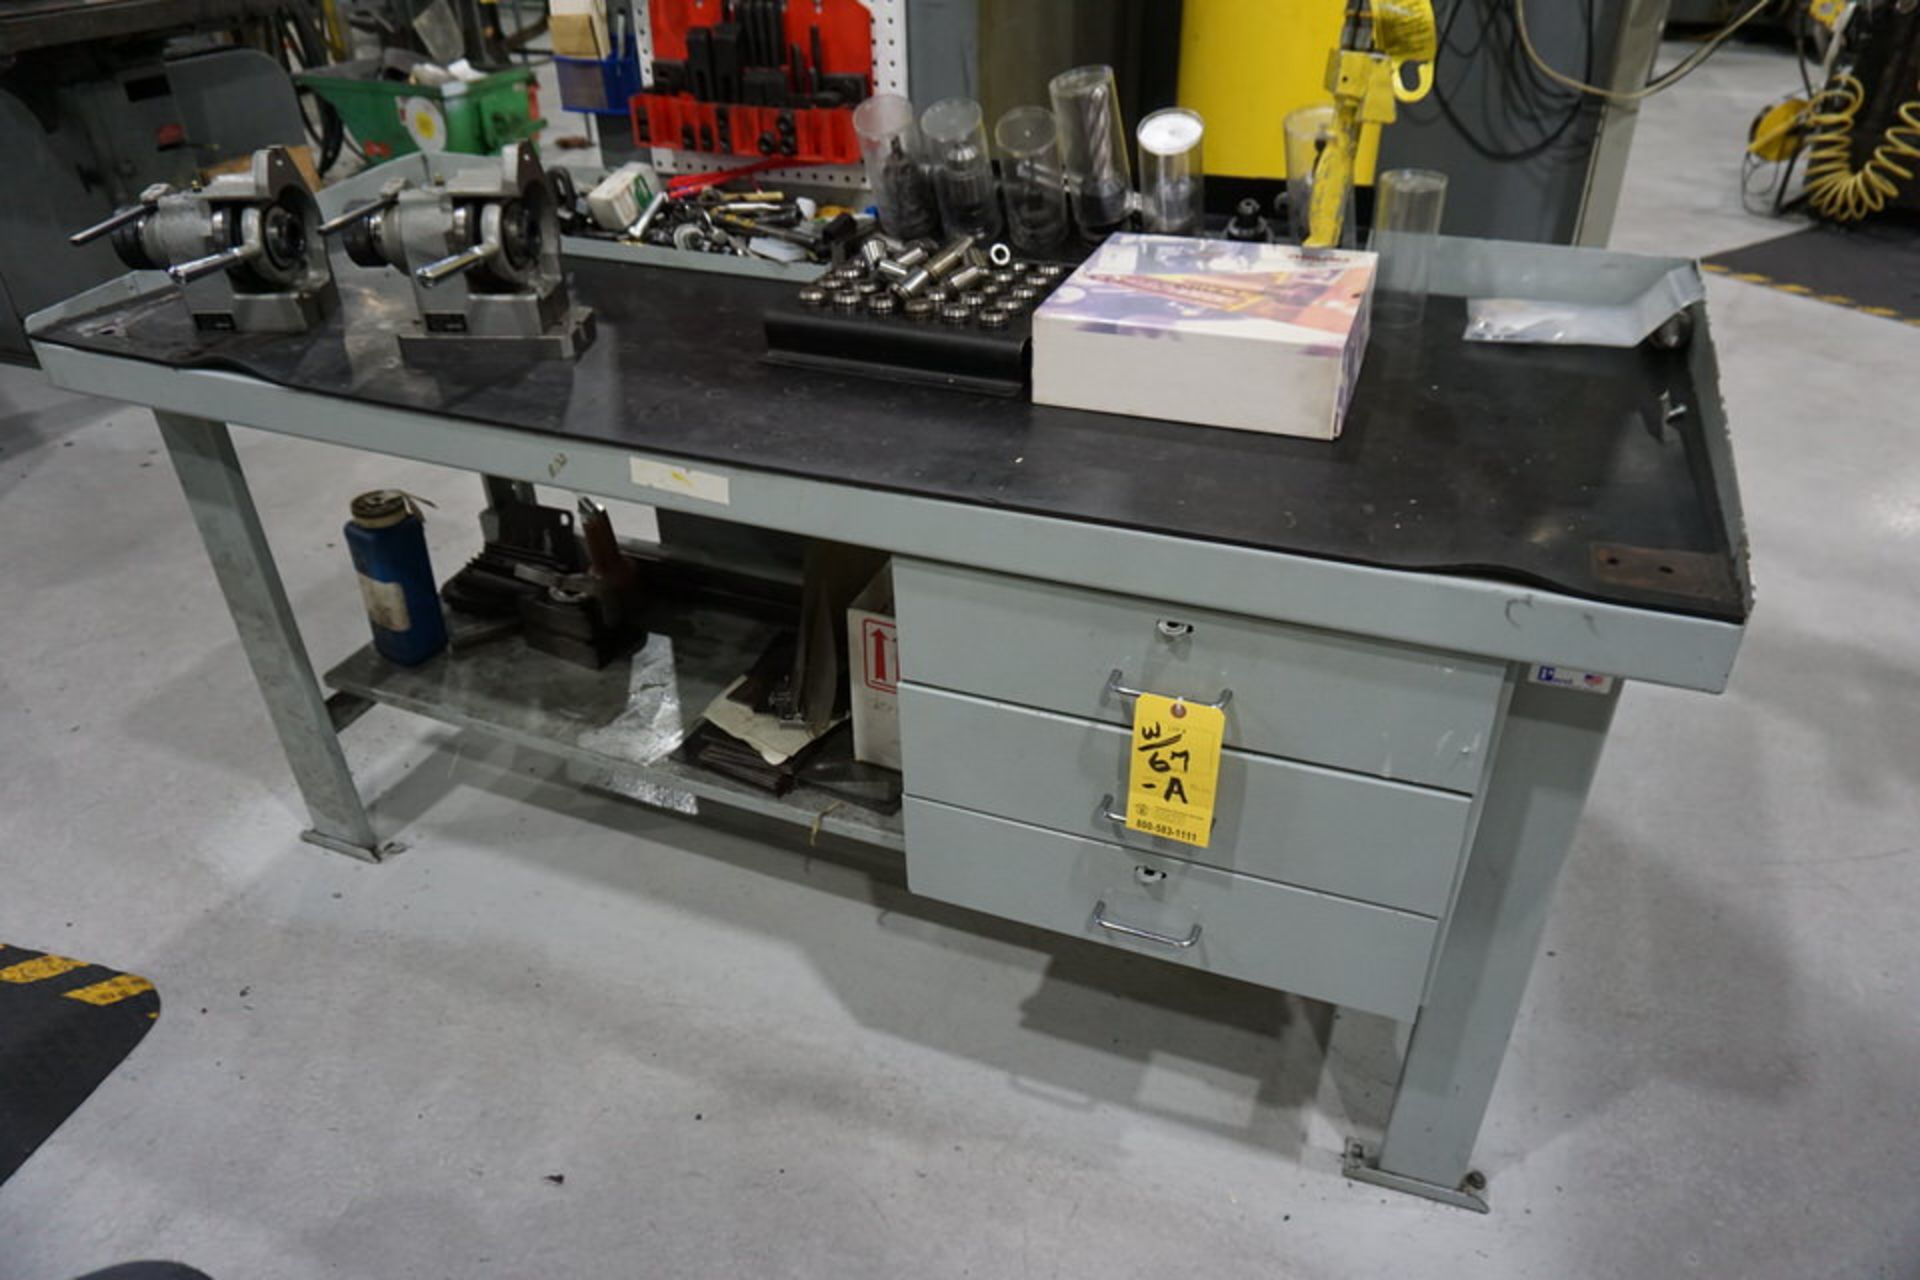 FRYER VERTICAL MILL, MDL: MB-11 W/ ANILAM CNC RETRO CTRL, 2 VISES, WORK BENCH ASSORT TOOLING - Image 5 of 8